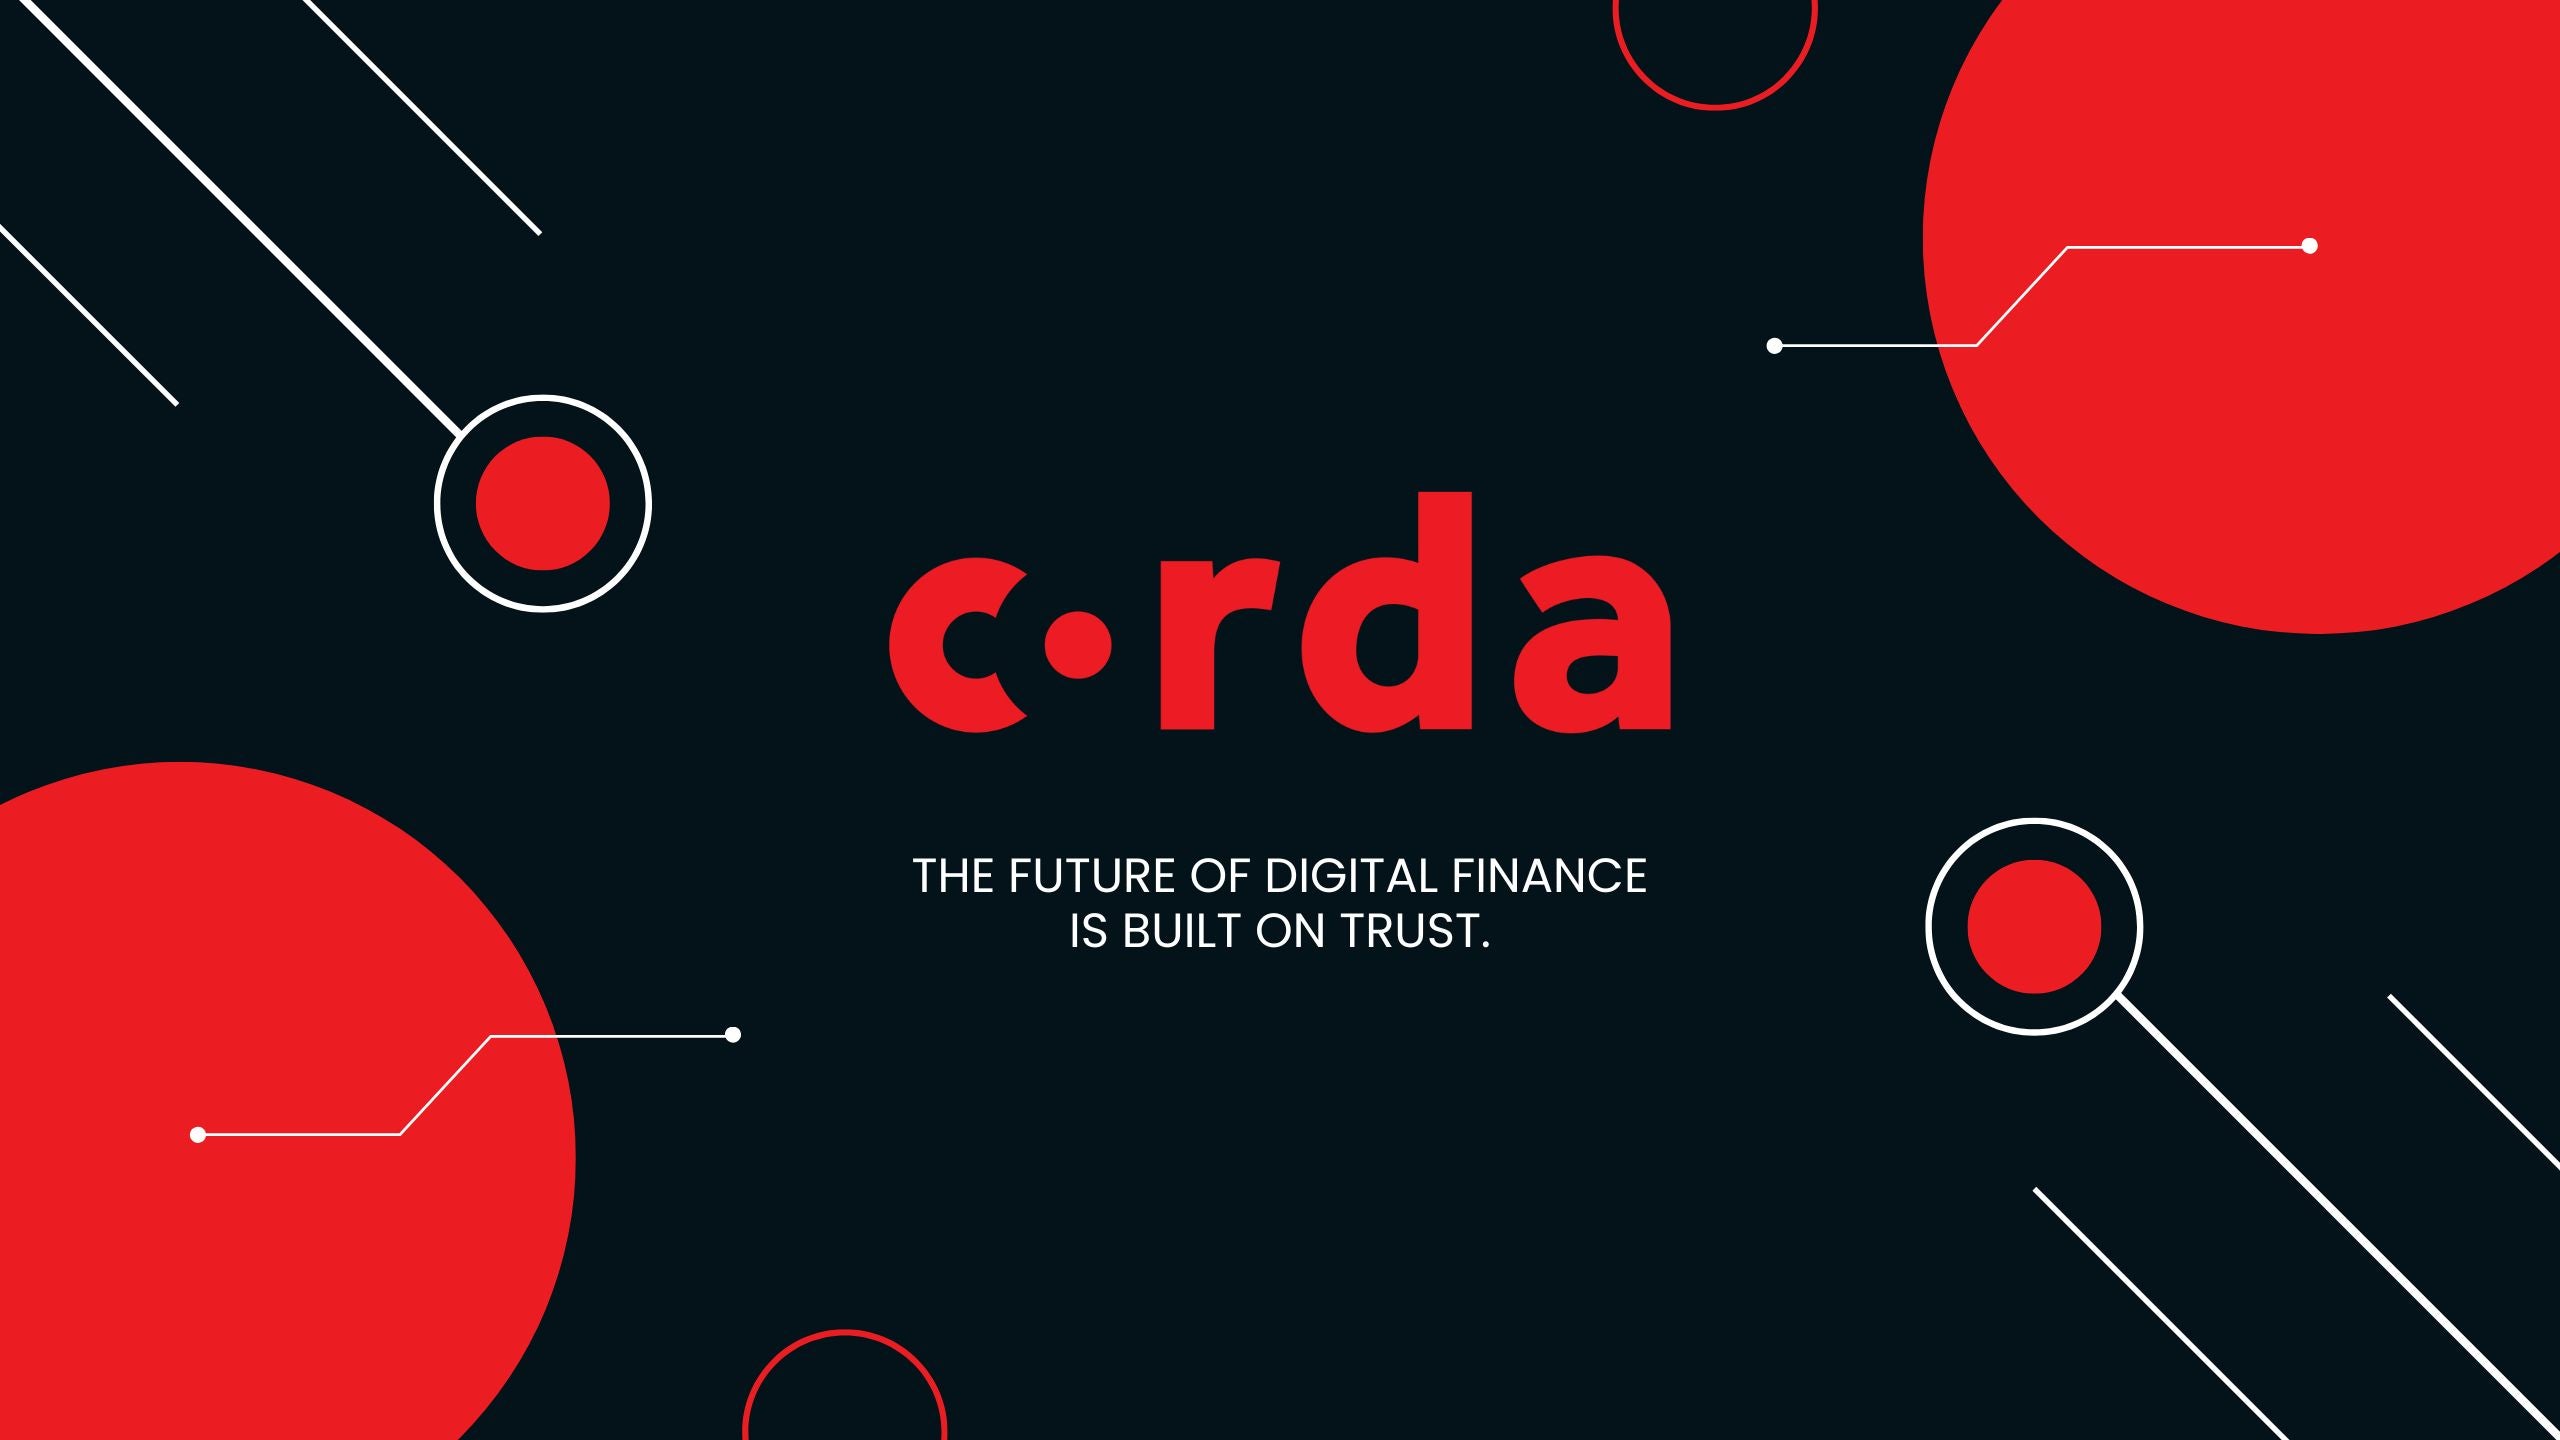 Load video: What is Corda